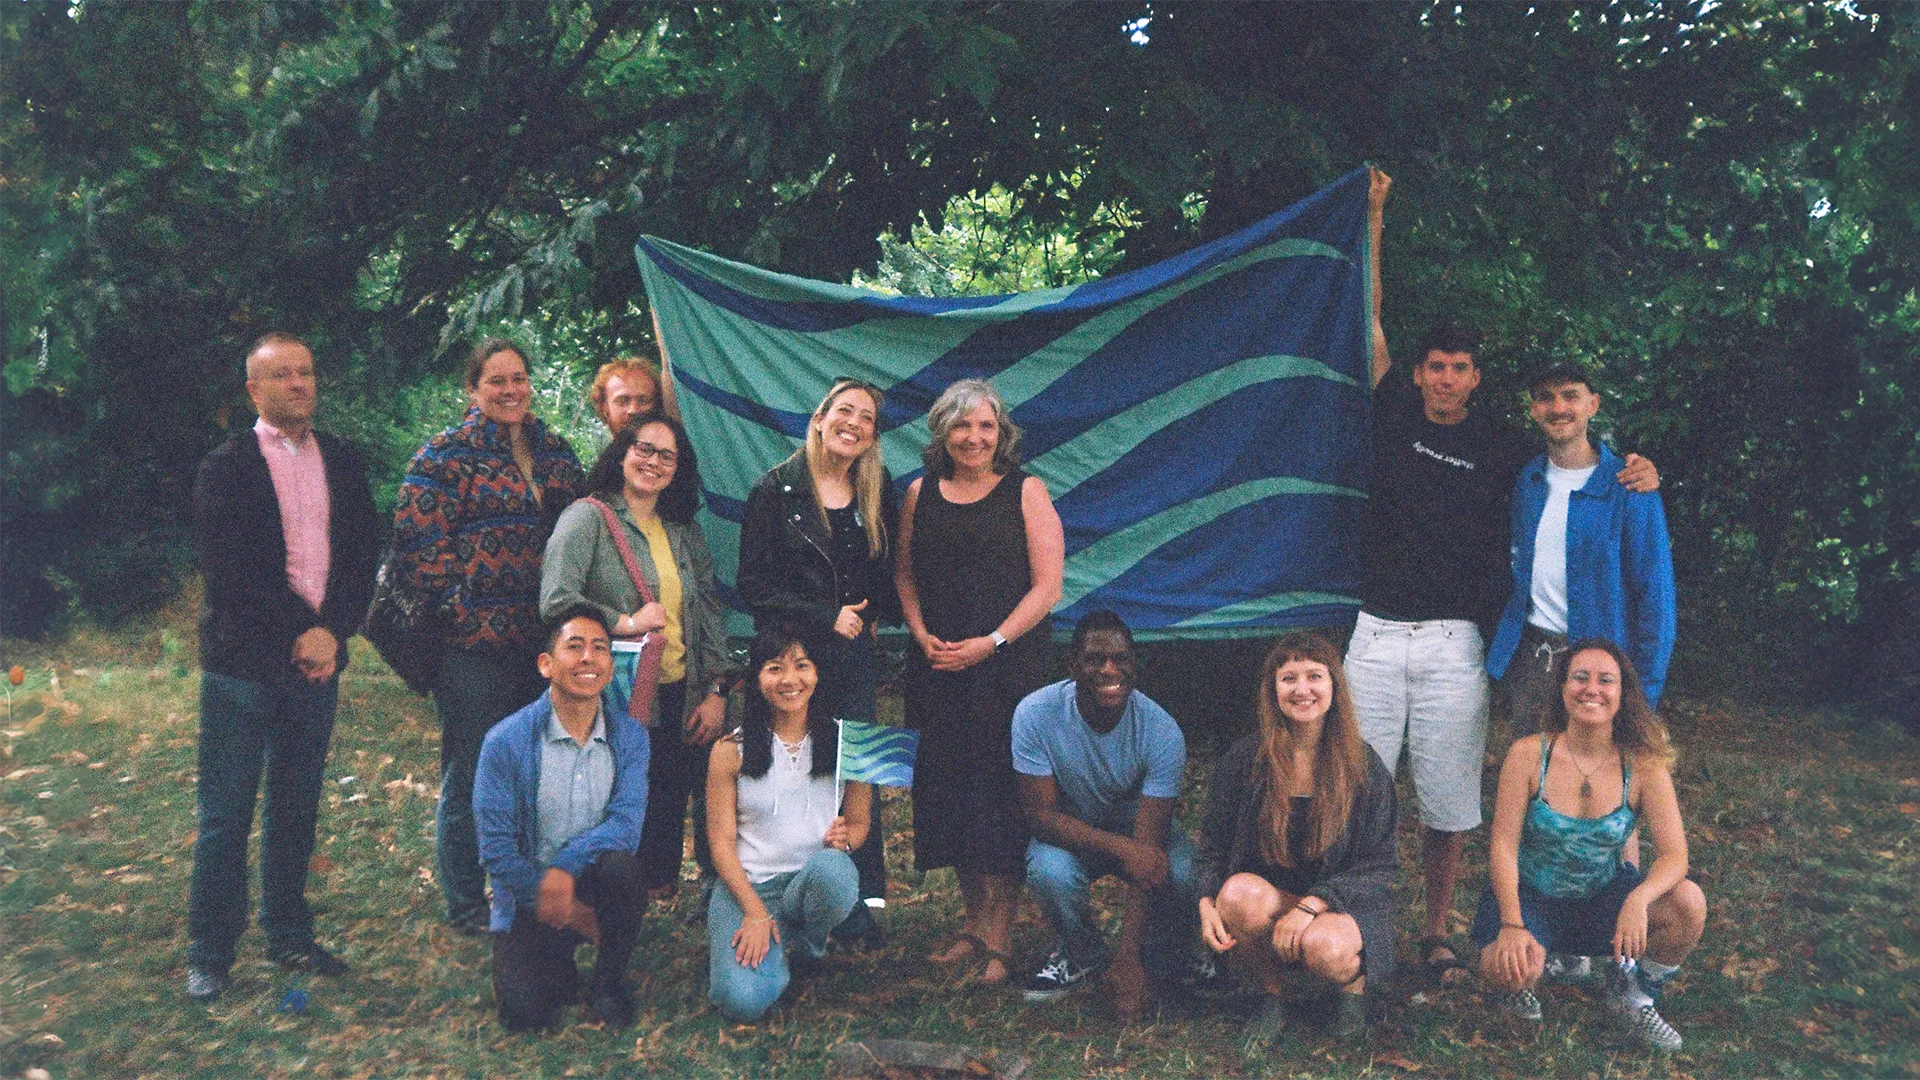 A group of people standing in a wooded, grassy area. The group is diverse in age, skin colour, body size and clothing colour and texture. In the centre of the composition, two people are holding a large, hand-made flag. The flag is a stuttering pride flag, and features seagreen and ultramarine waves.